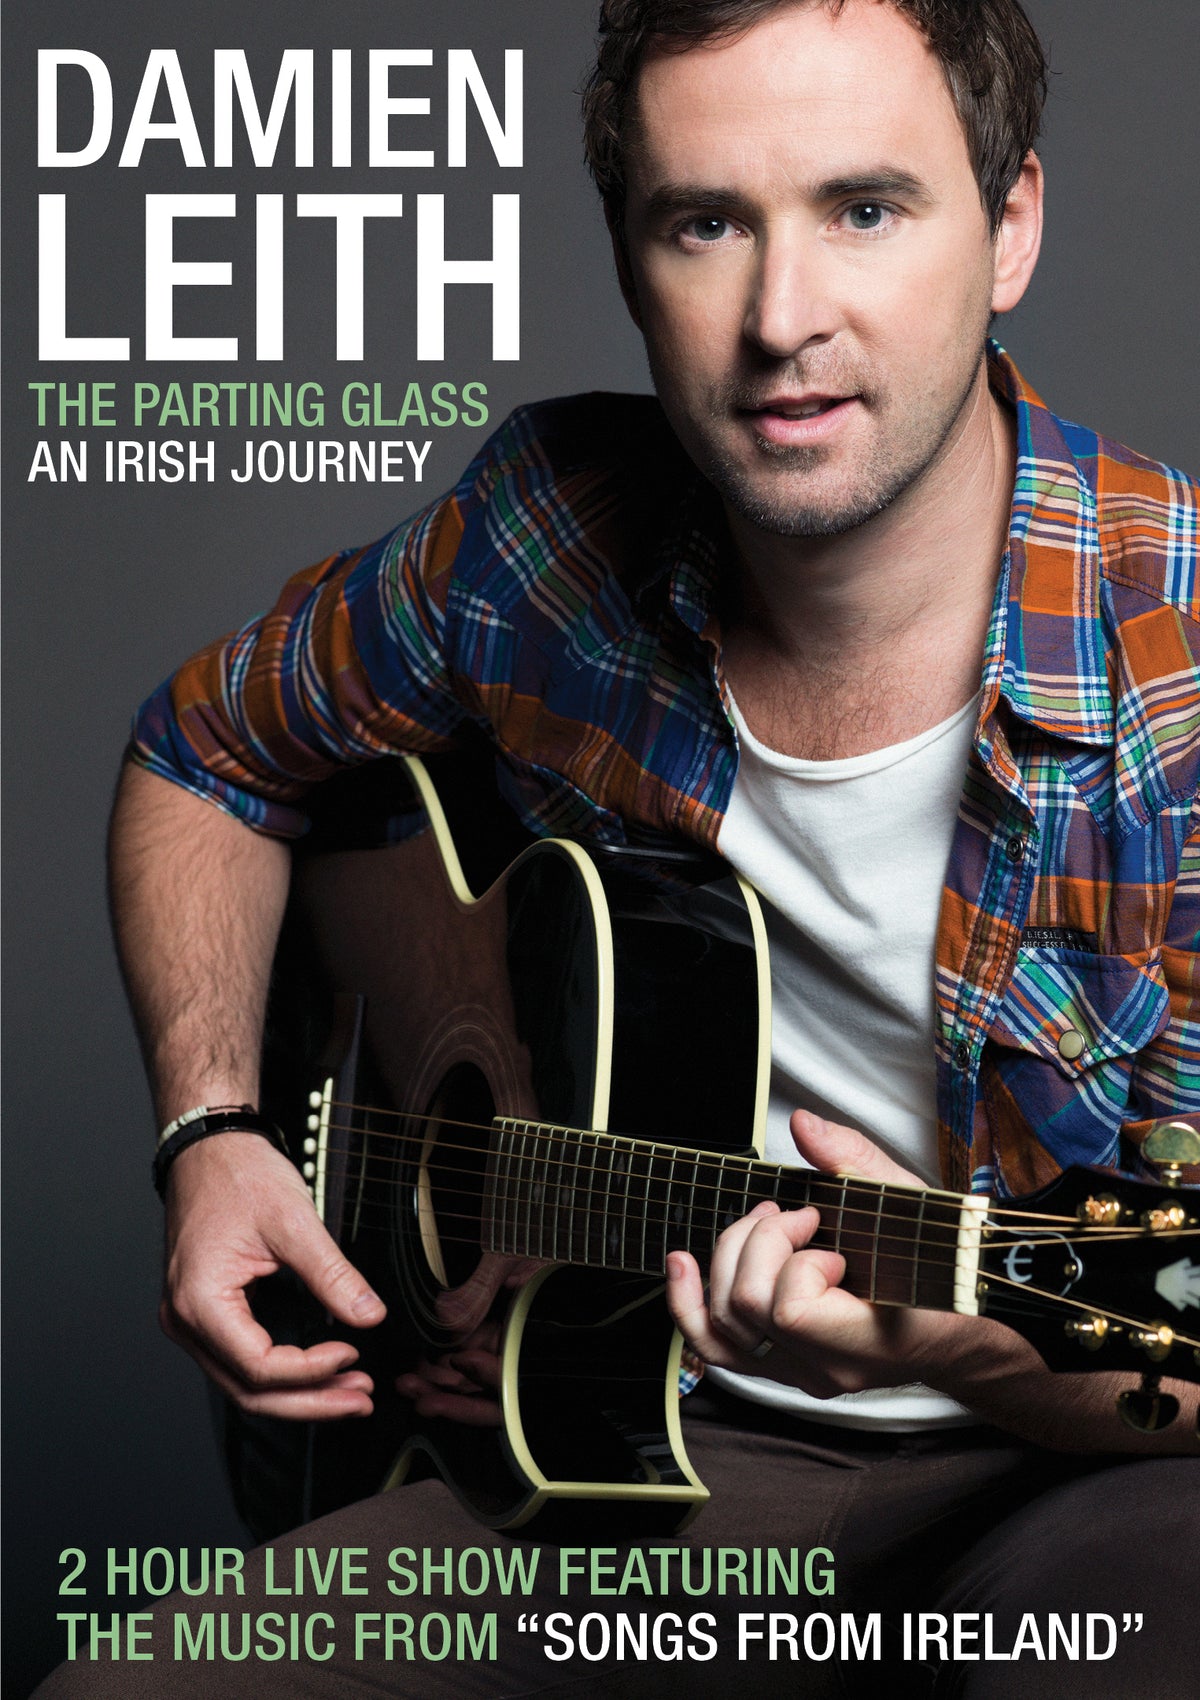 DAMIEN LEITH - THE PARTING GLASS: AN IRISH JOURNEY (DVD)